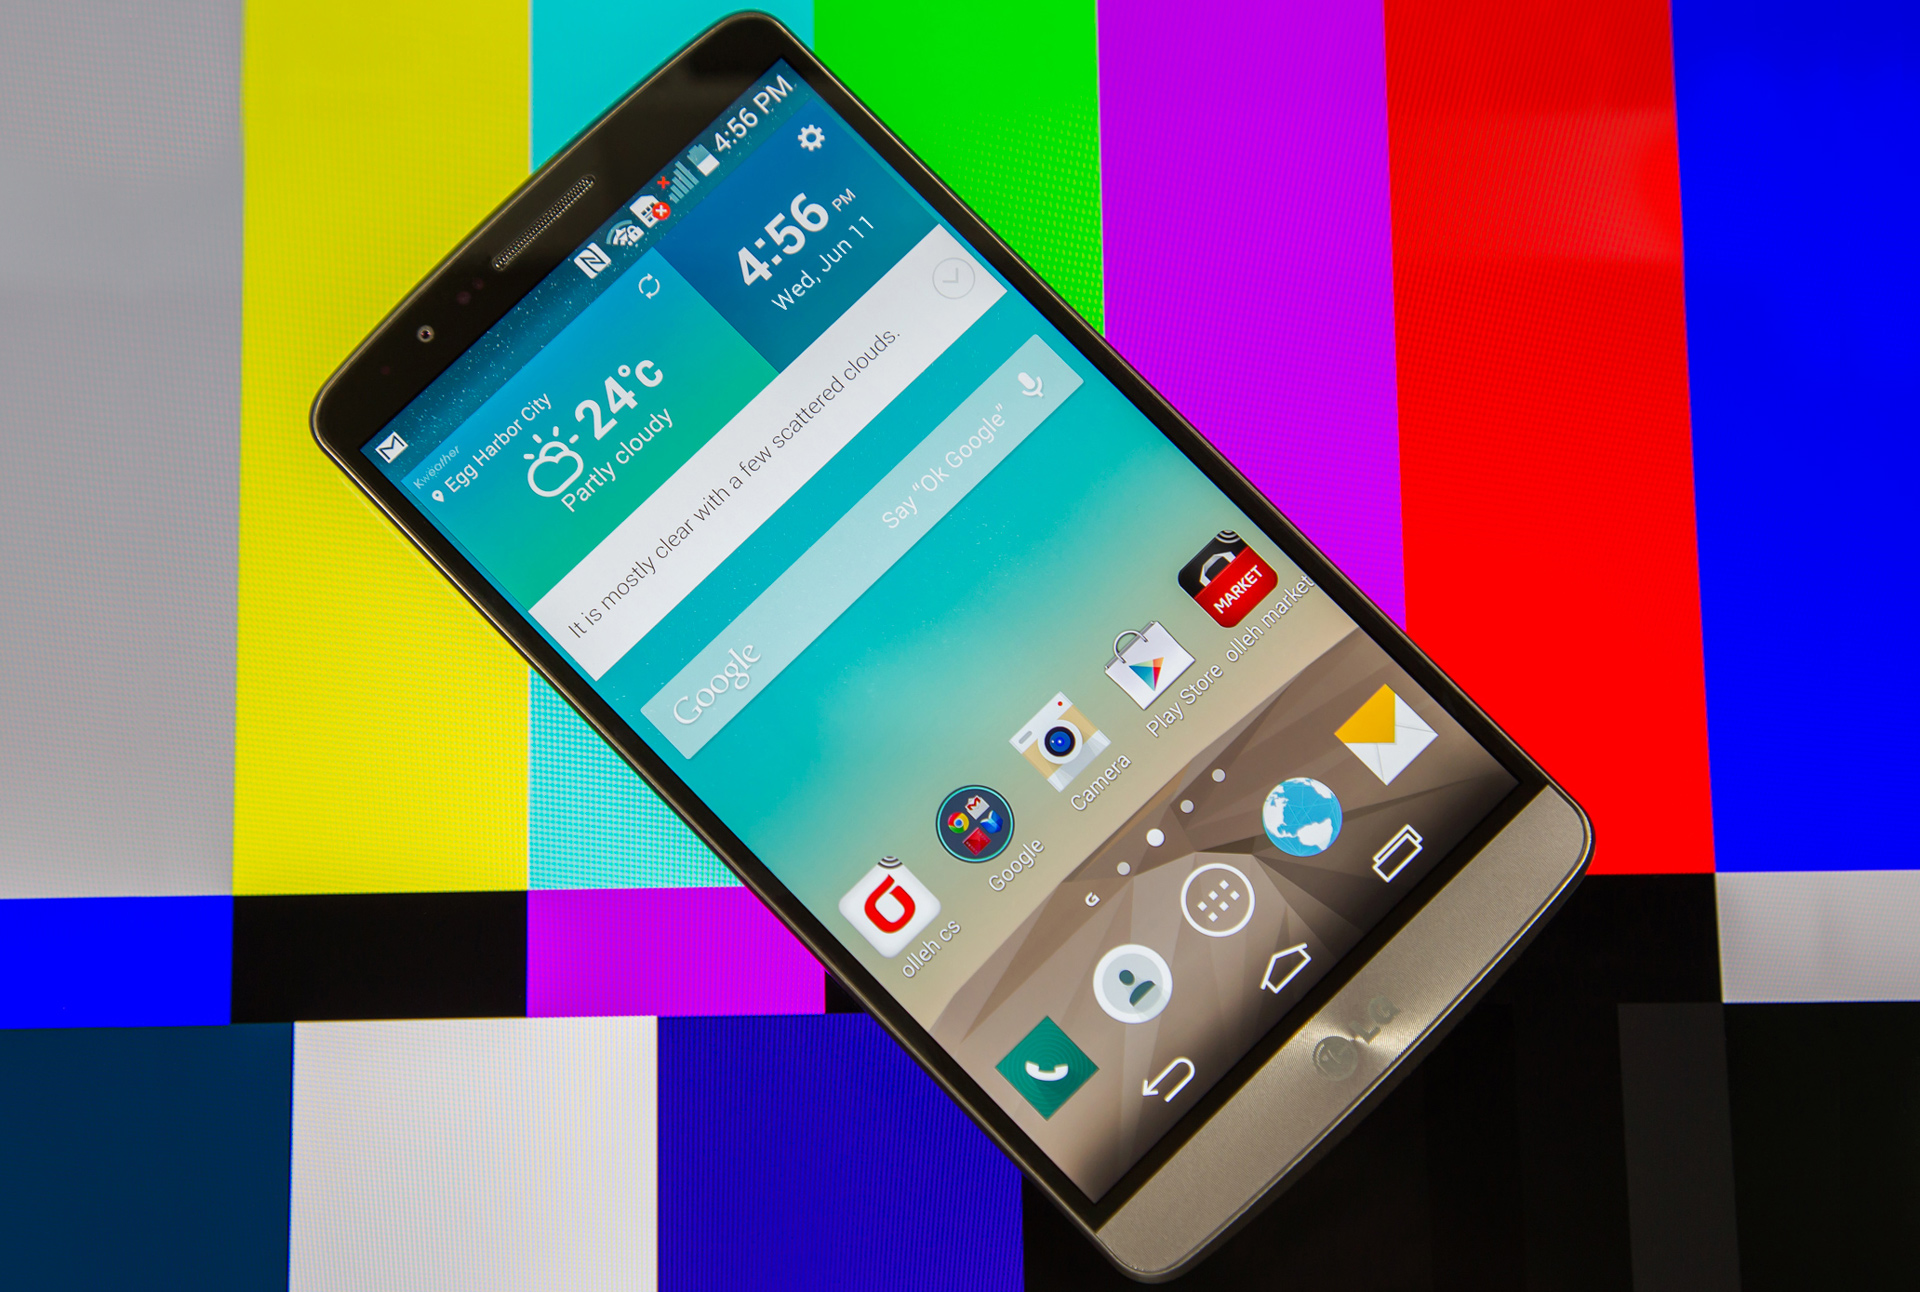 LG G3 Now Available at Verizon Wireless for $99 on Contract